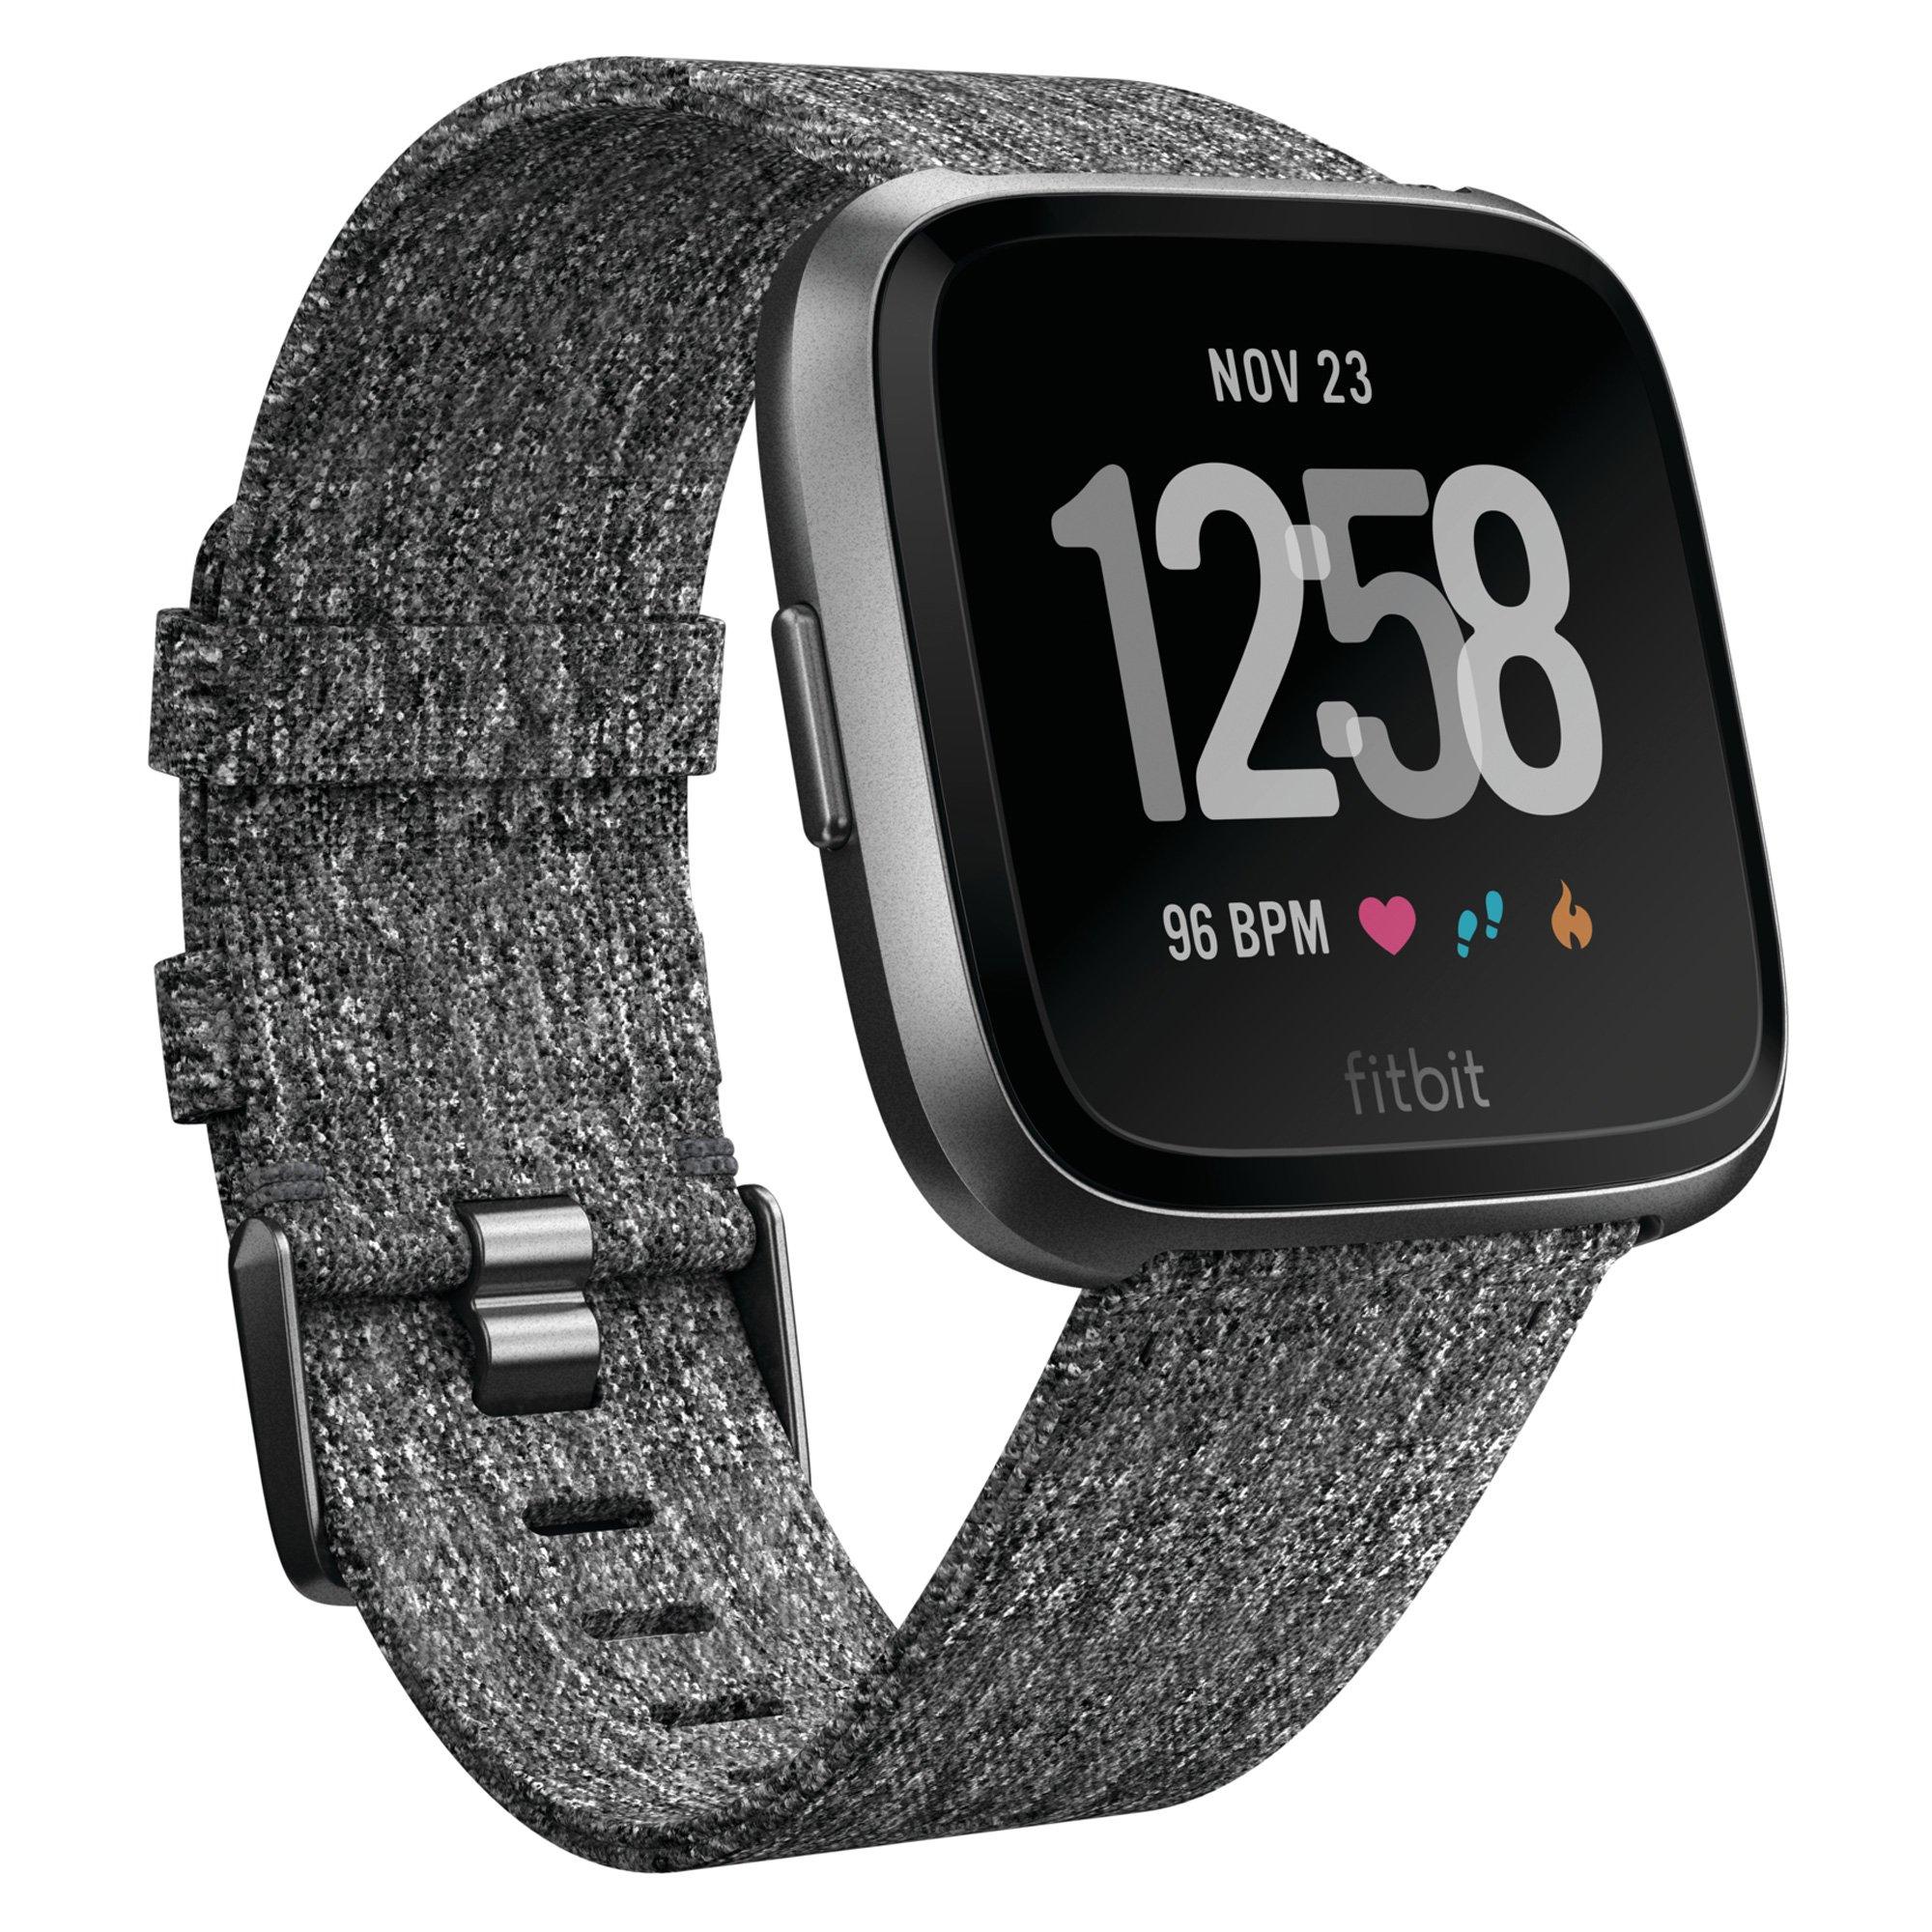 Image of fitbit Versa Special Edition Activity Tracker